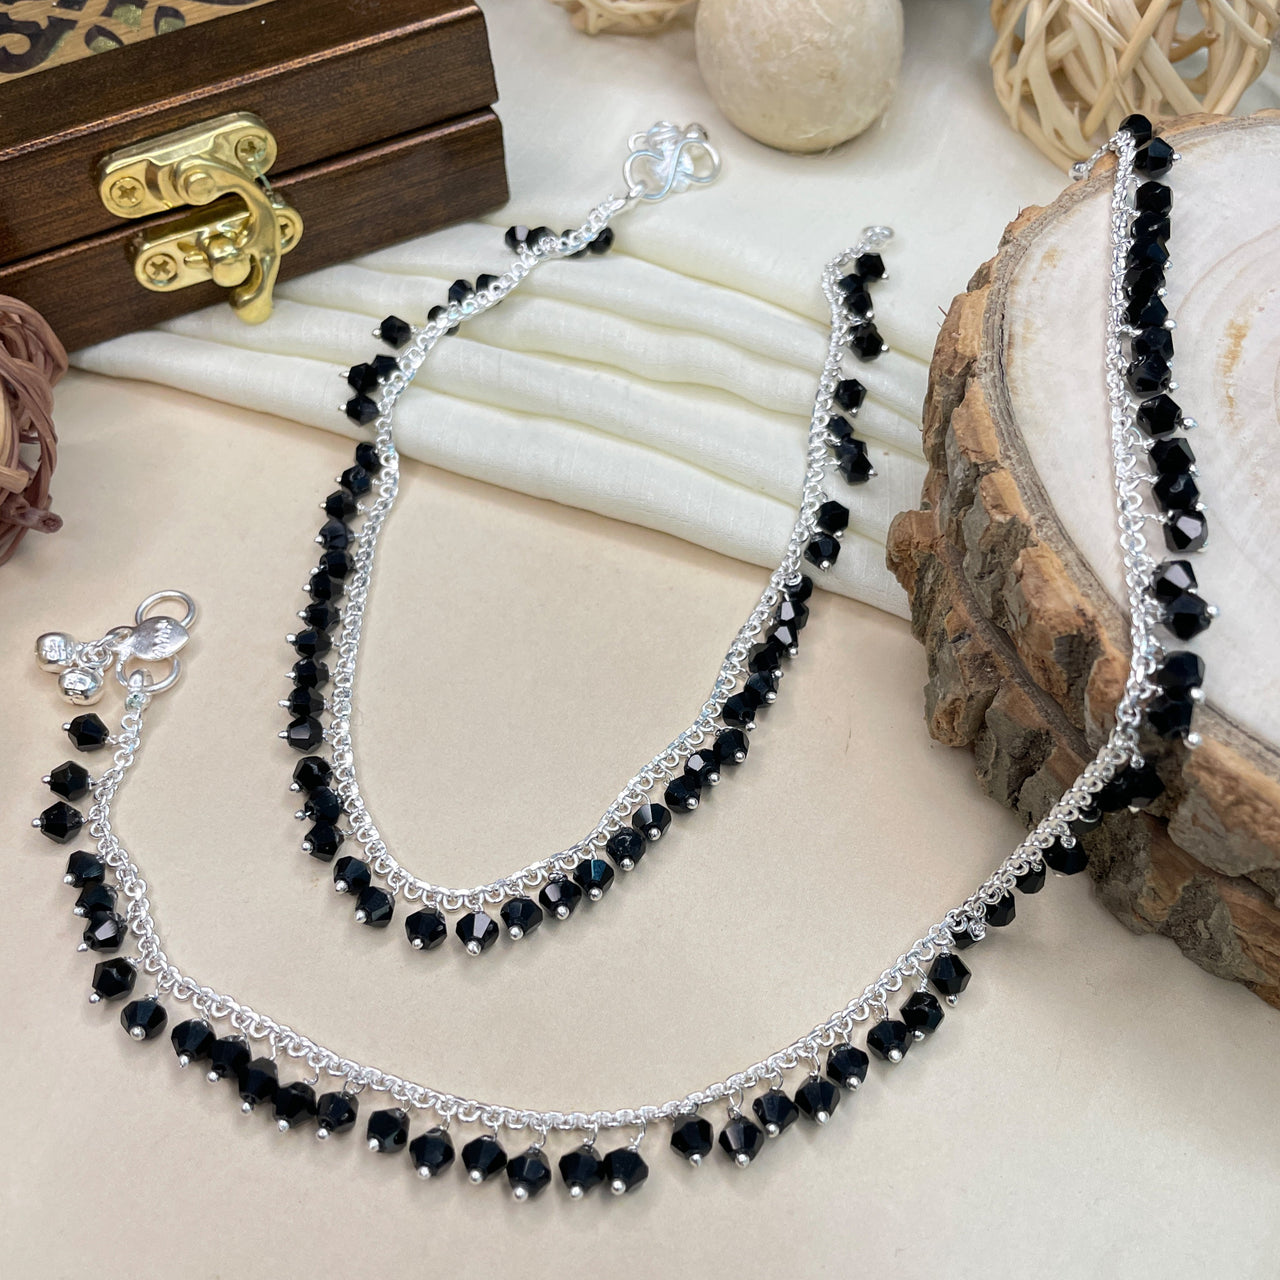 High Quality Silver BlackBead Anklet